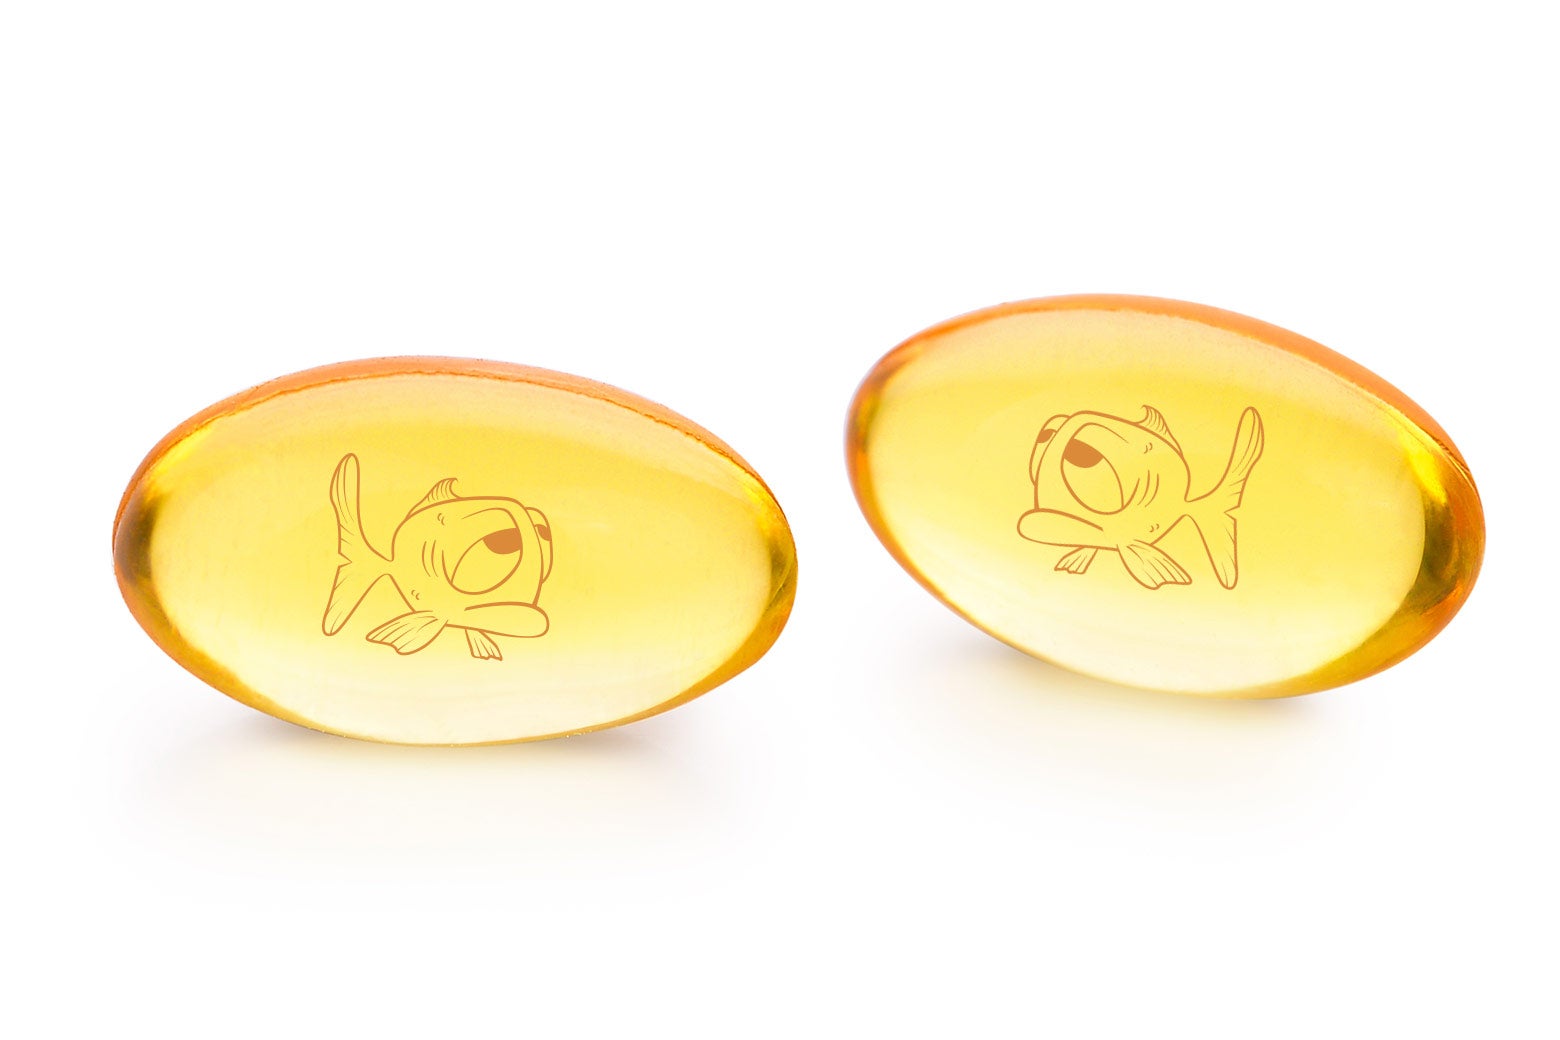 Two omega-3 capsules with sad-looking fish drawn inside them.